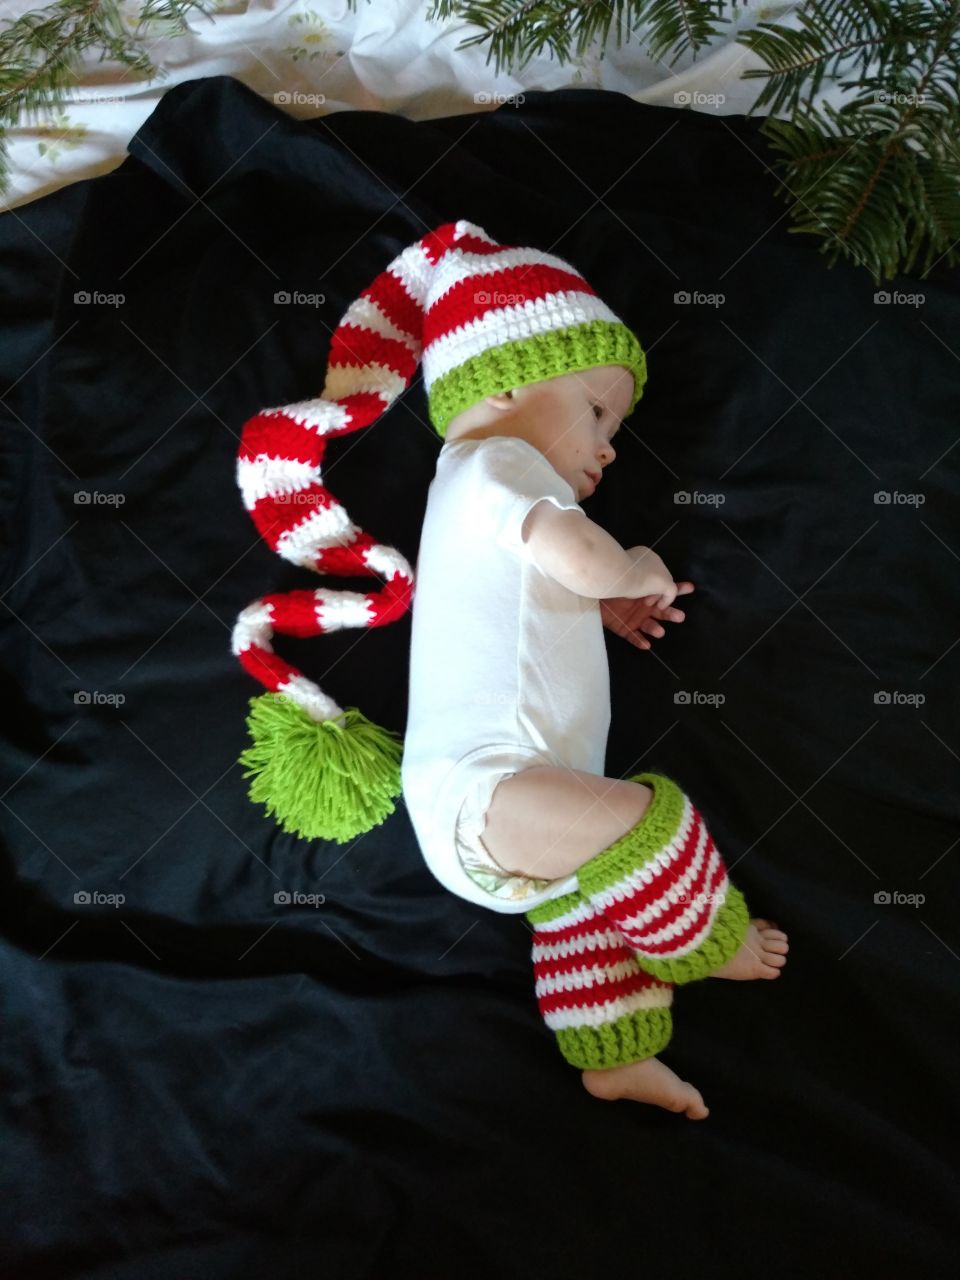 Elevated view of a baby wearing woolen cap